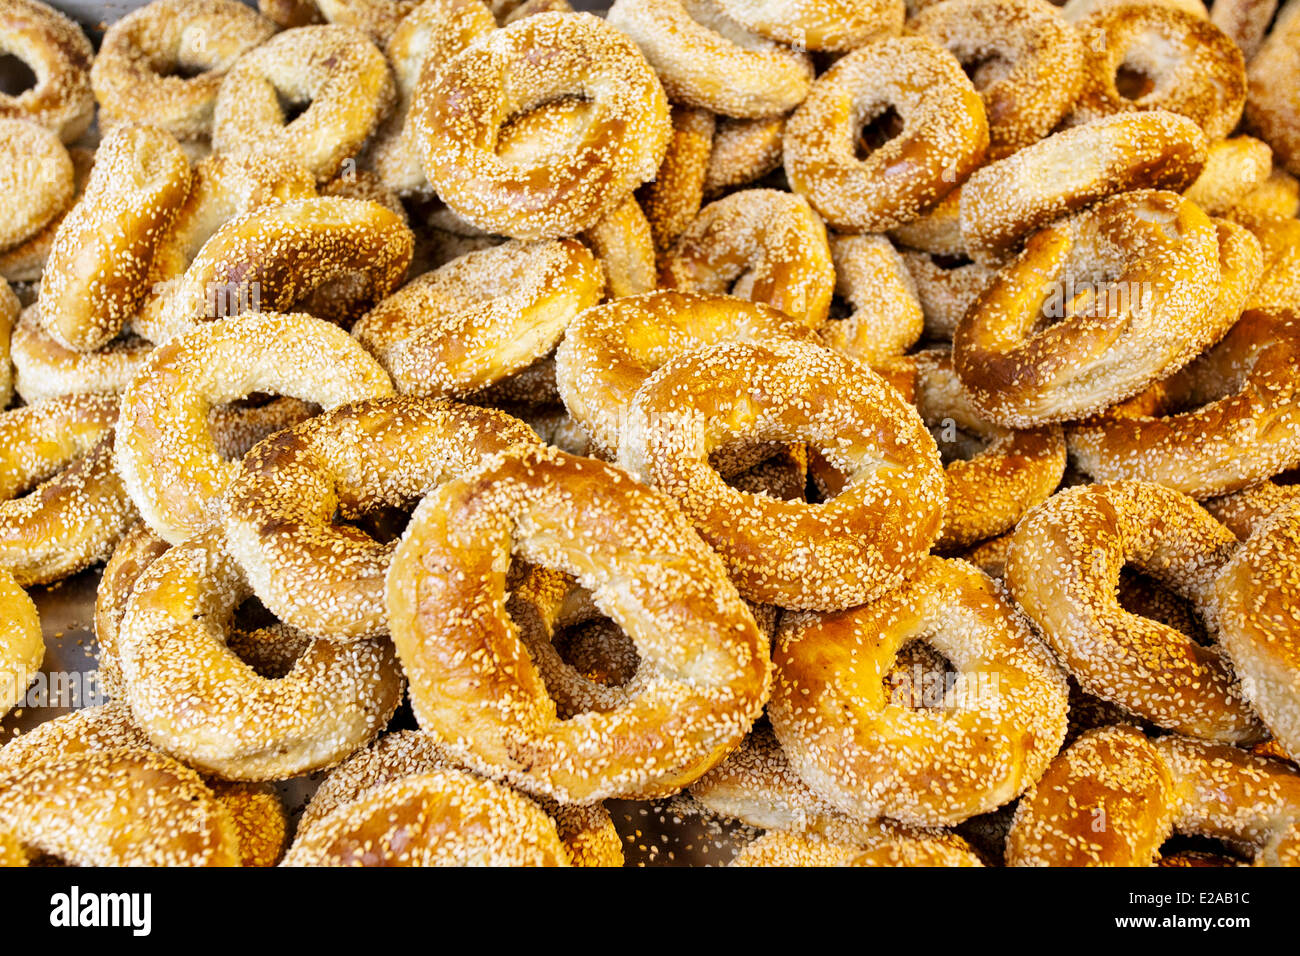 Canada, Quebec Province, Montreal, Mile End, bagels, Jewish pastry, Montreal specialty Stock Photo